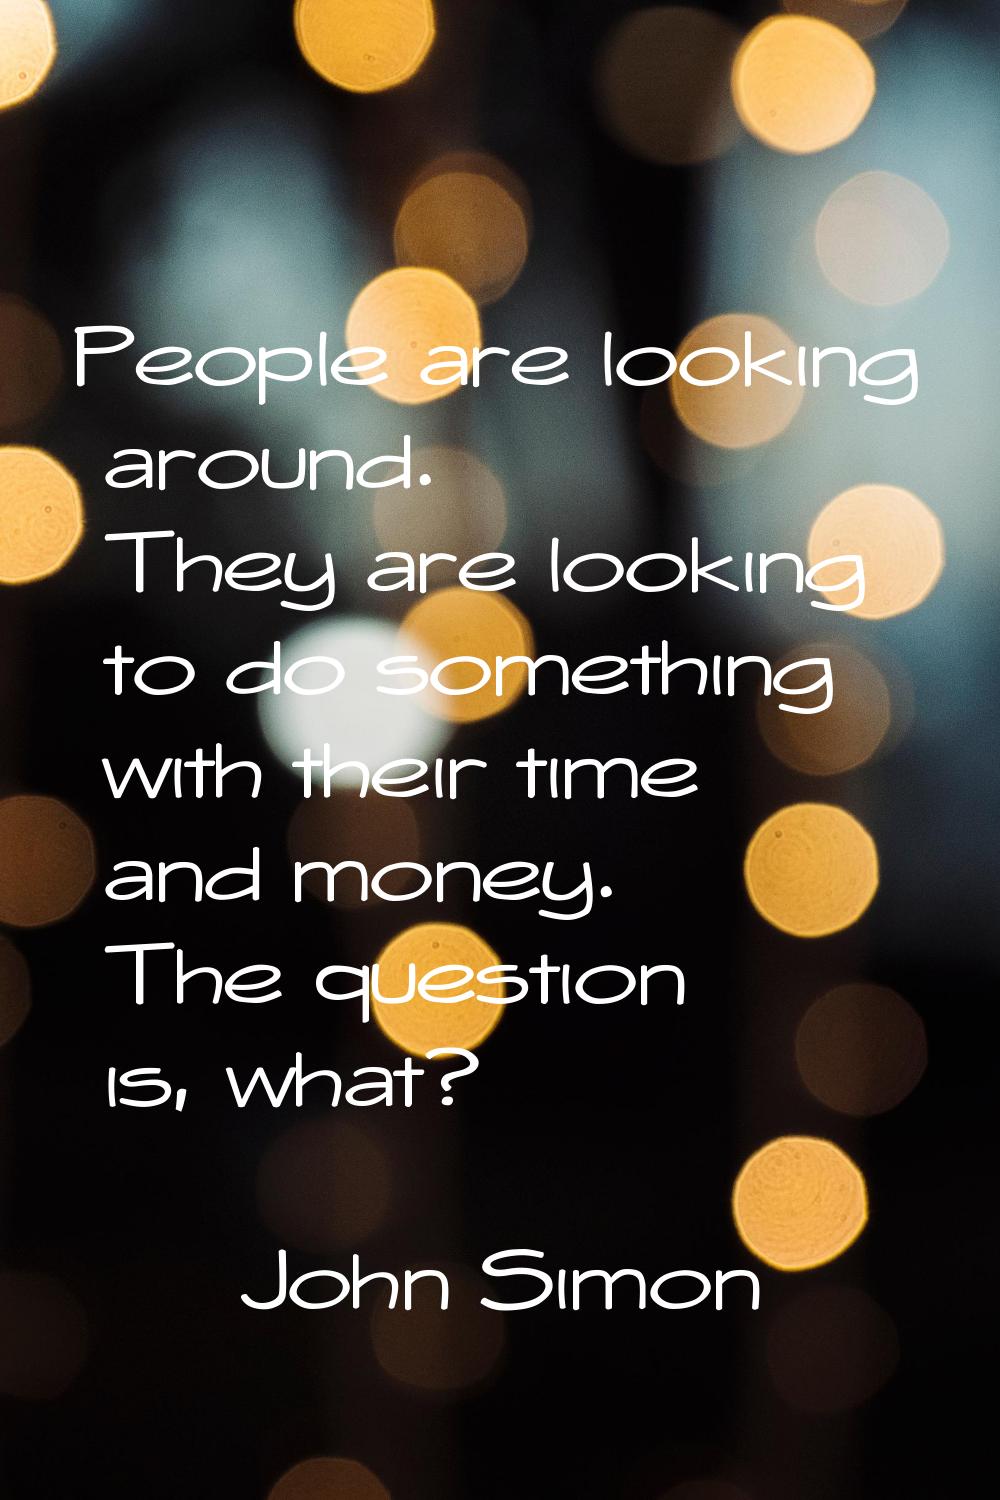 People are looking around. They are looking to do something with their time and money. The question